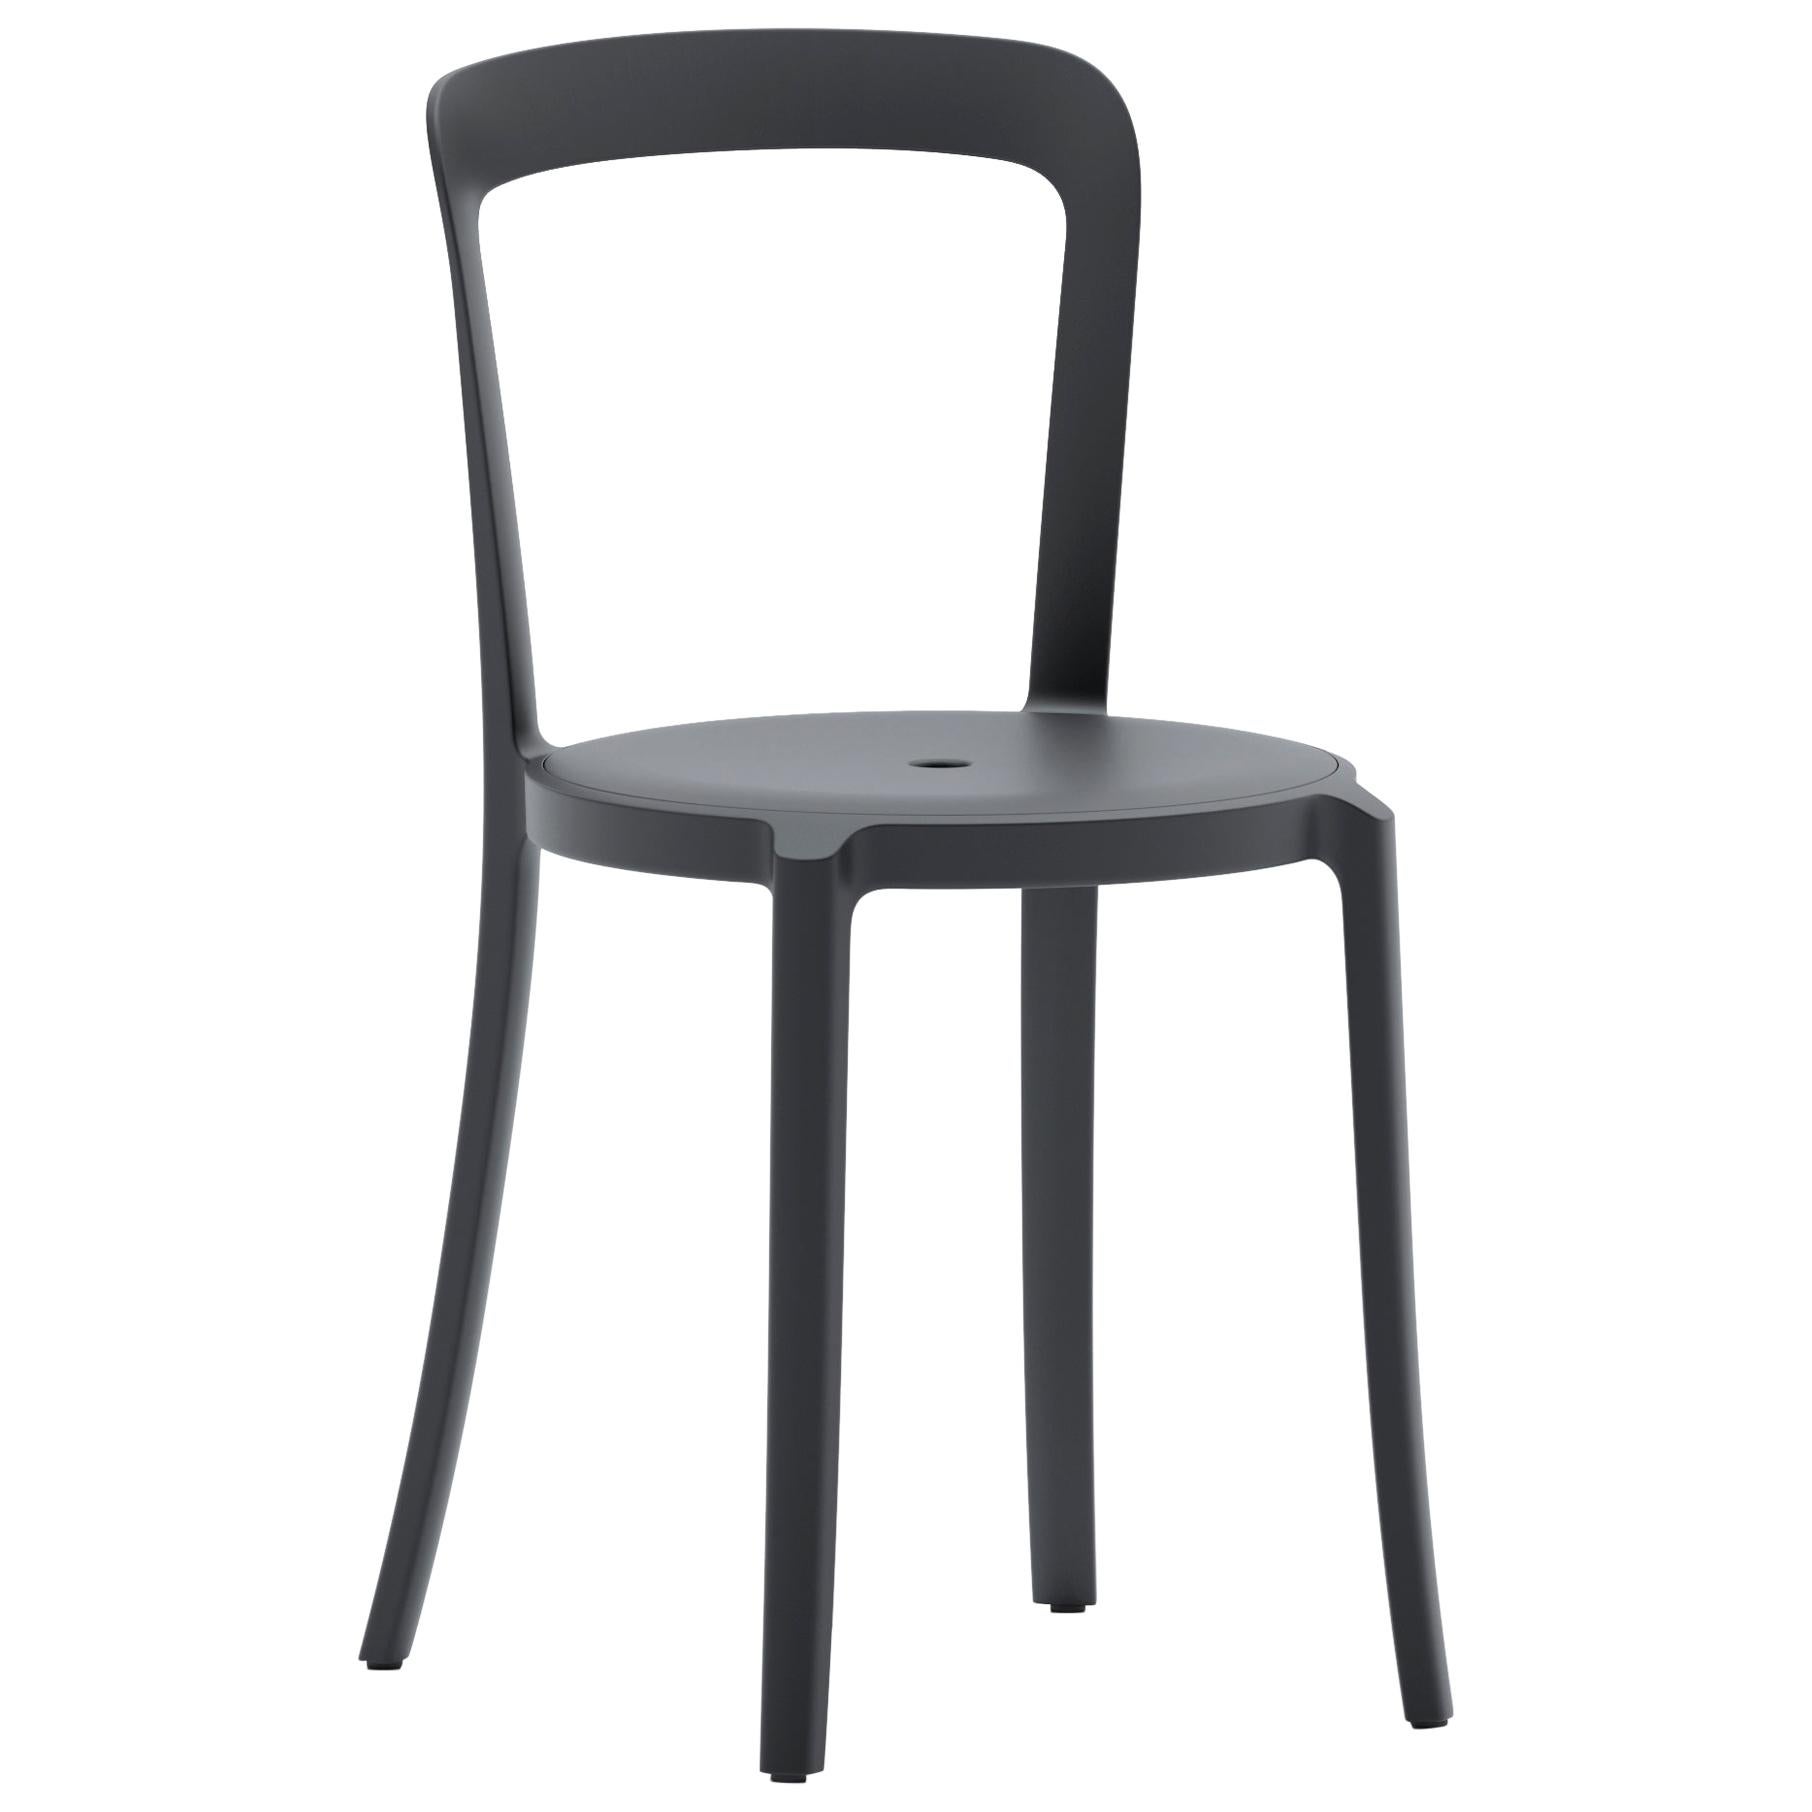 Emeco On & On Stacking Chair in Black Plastic by Barber & Osgerby